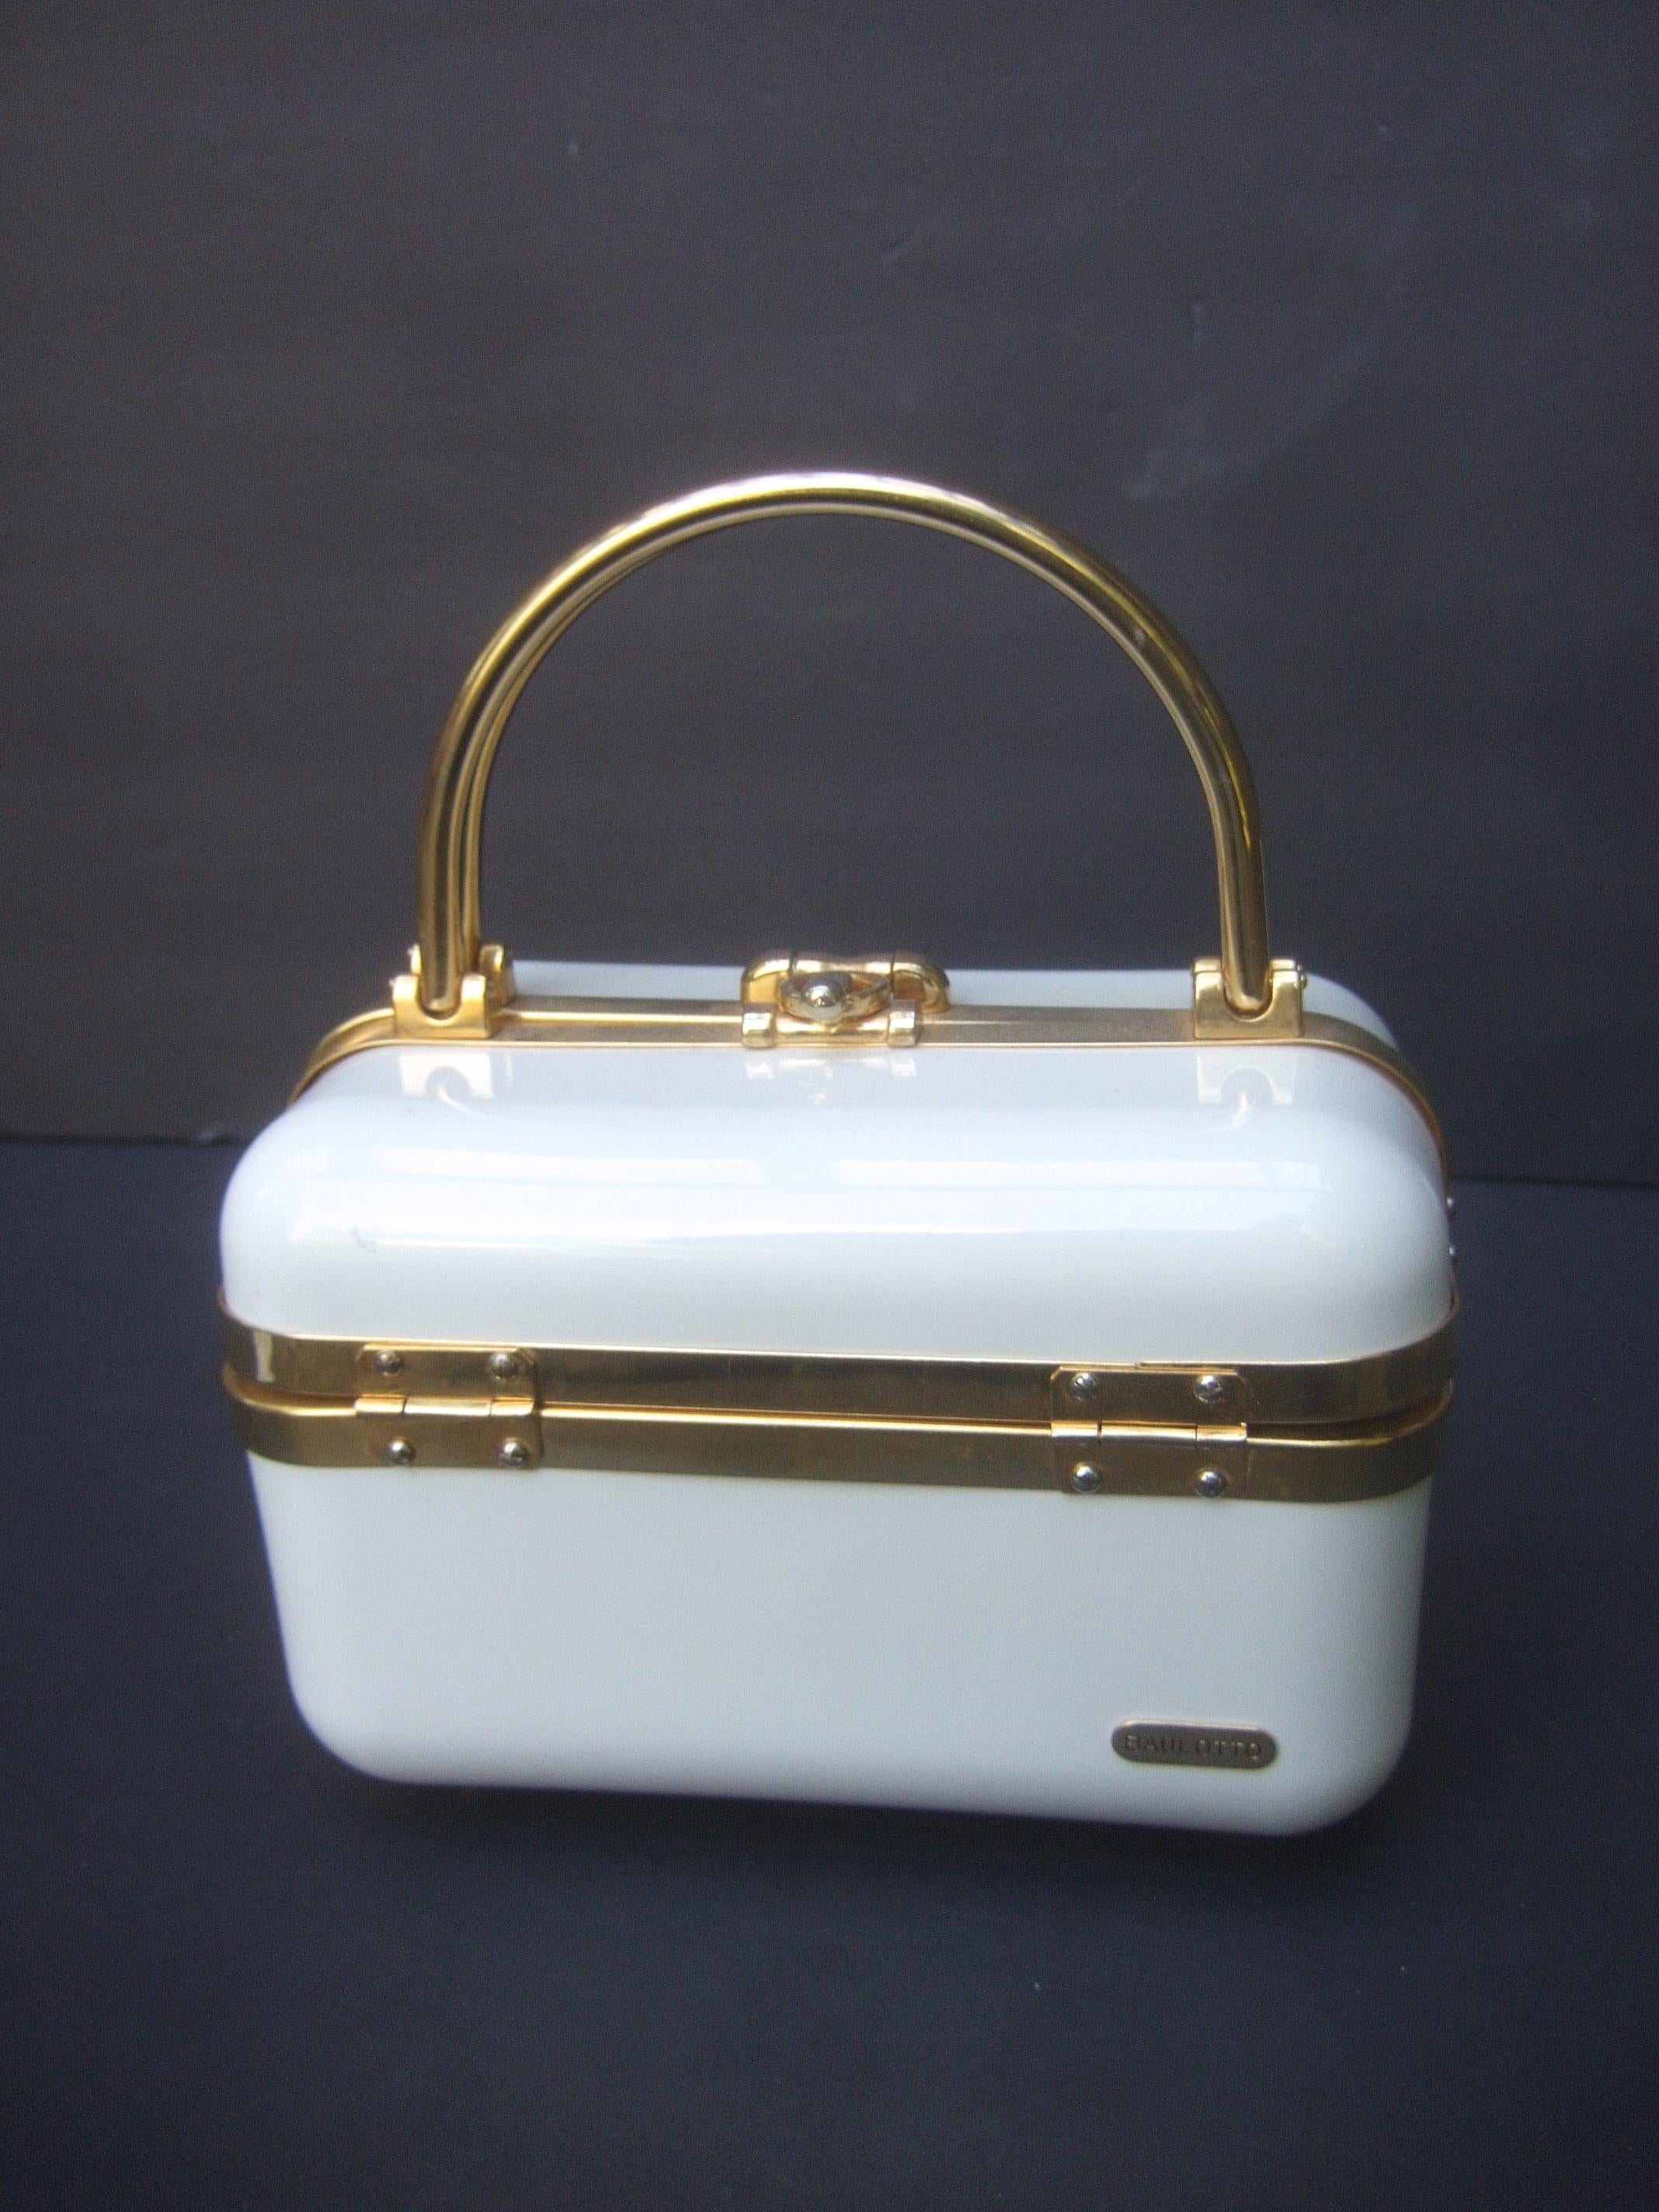 1970s Mod Italian molded resin box purse designed by Baulotto  
The sleek Italian white plastic box purse is accented with gilt
metal swivel handles and hardware 

The interior is lined in vinyl designed with a zippered compartment 
Makes a bold